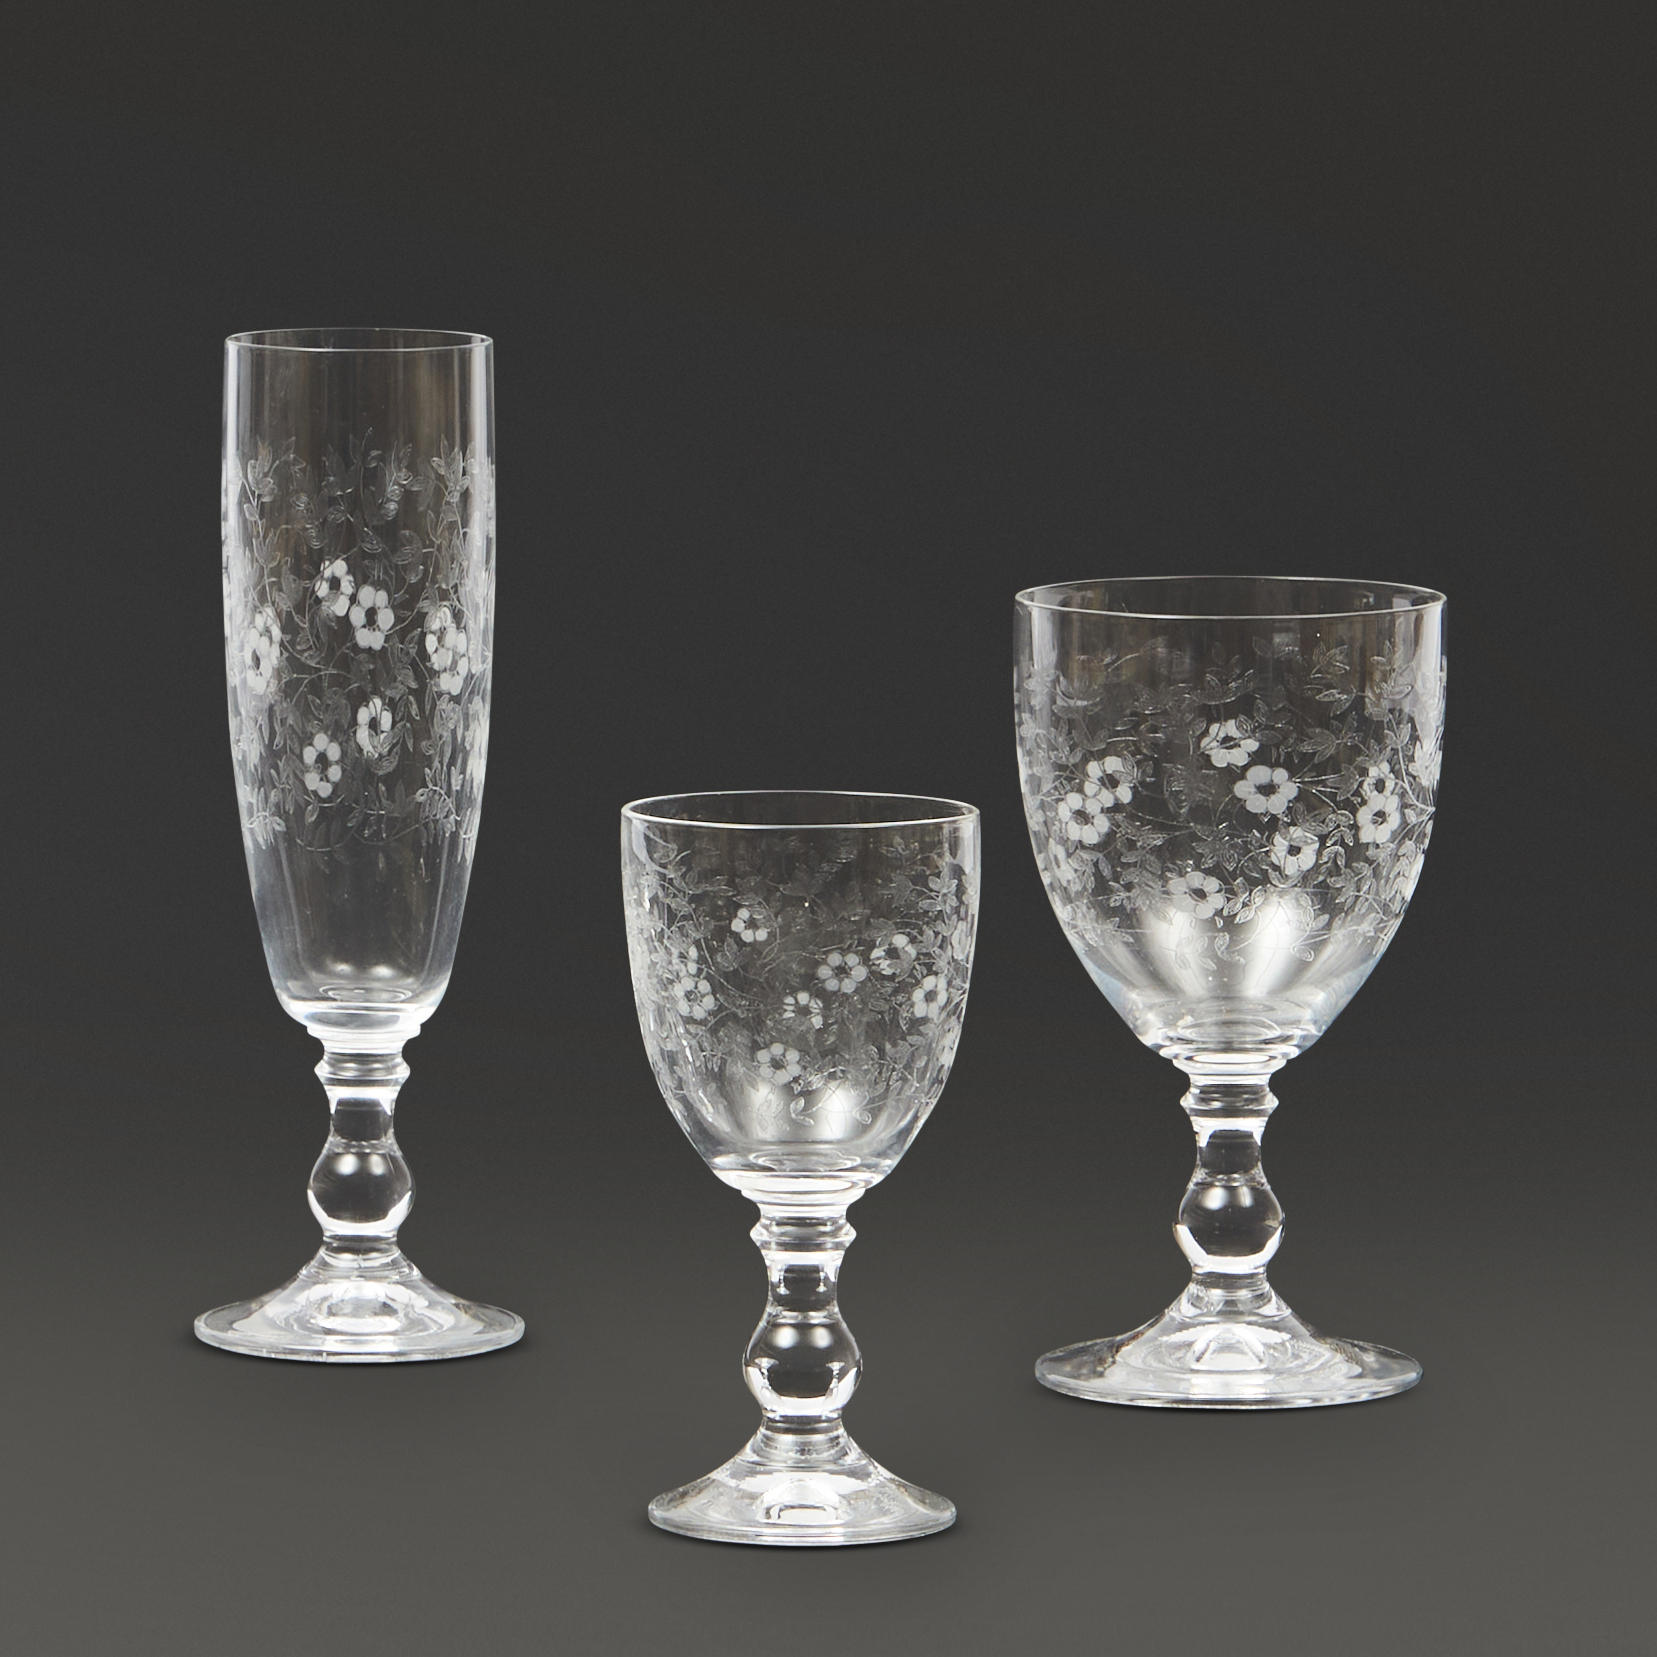 GROUP OF ETCHED GLASS STEMWARE 3ae7b7